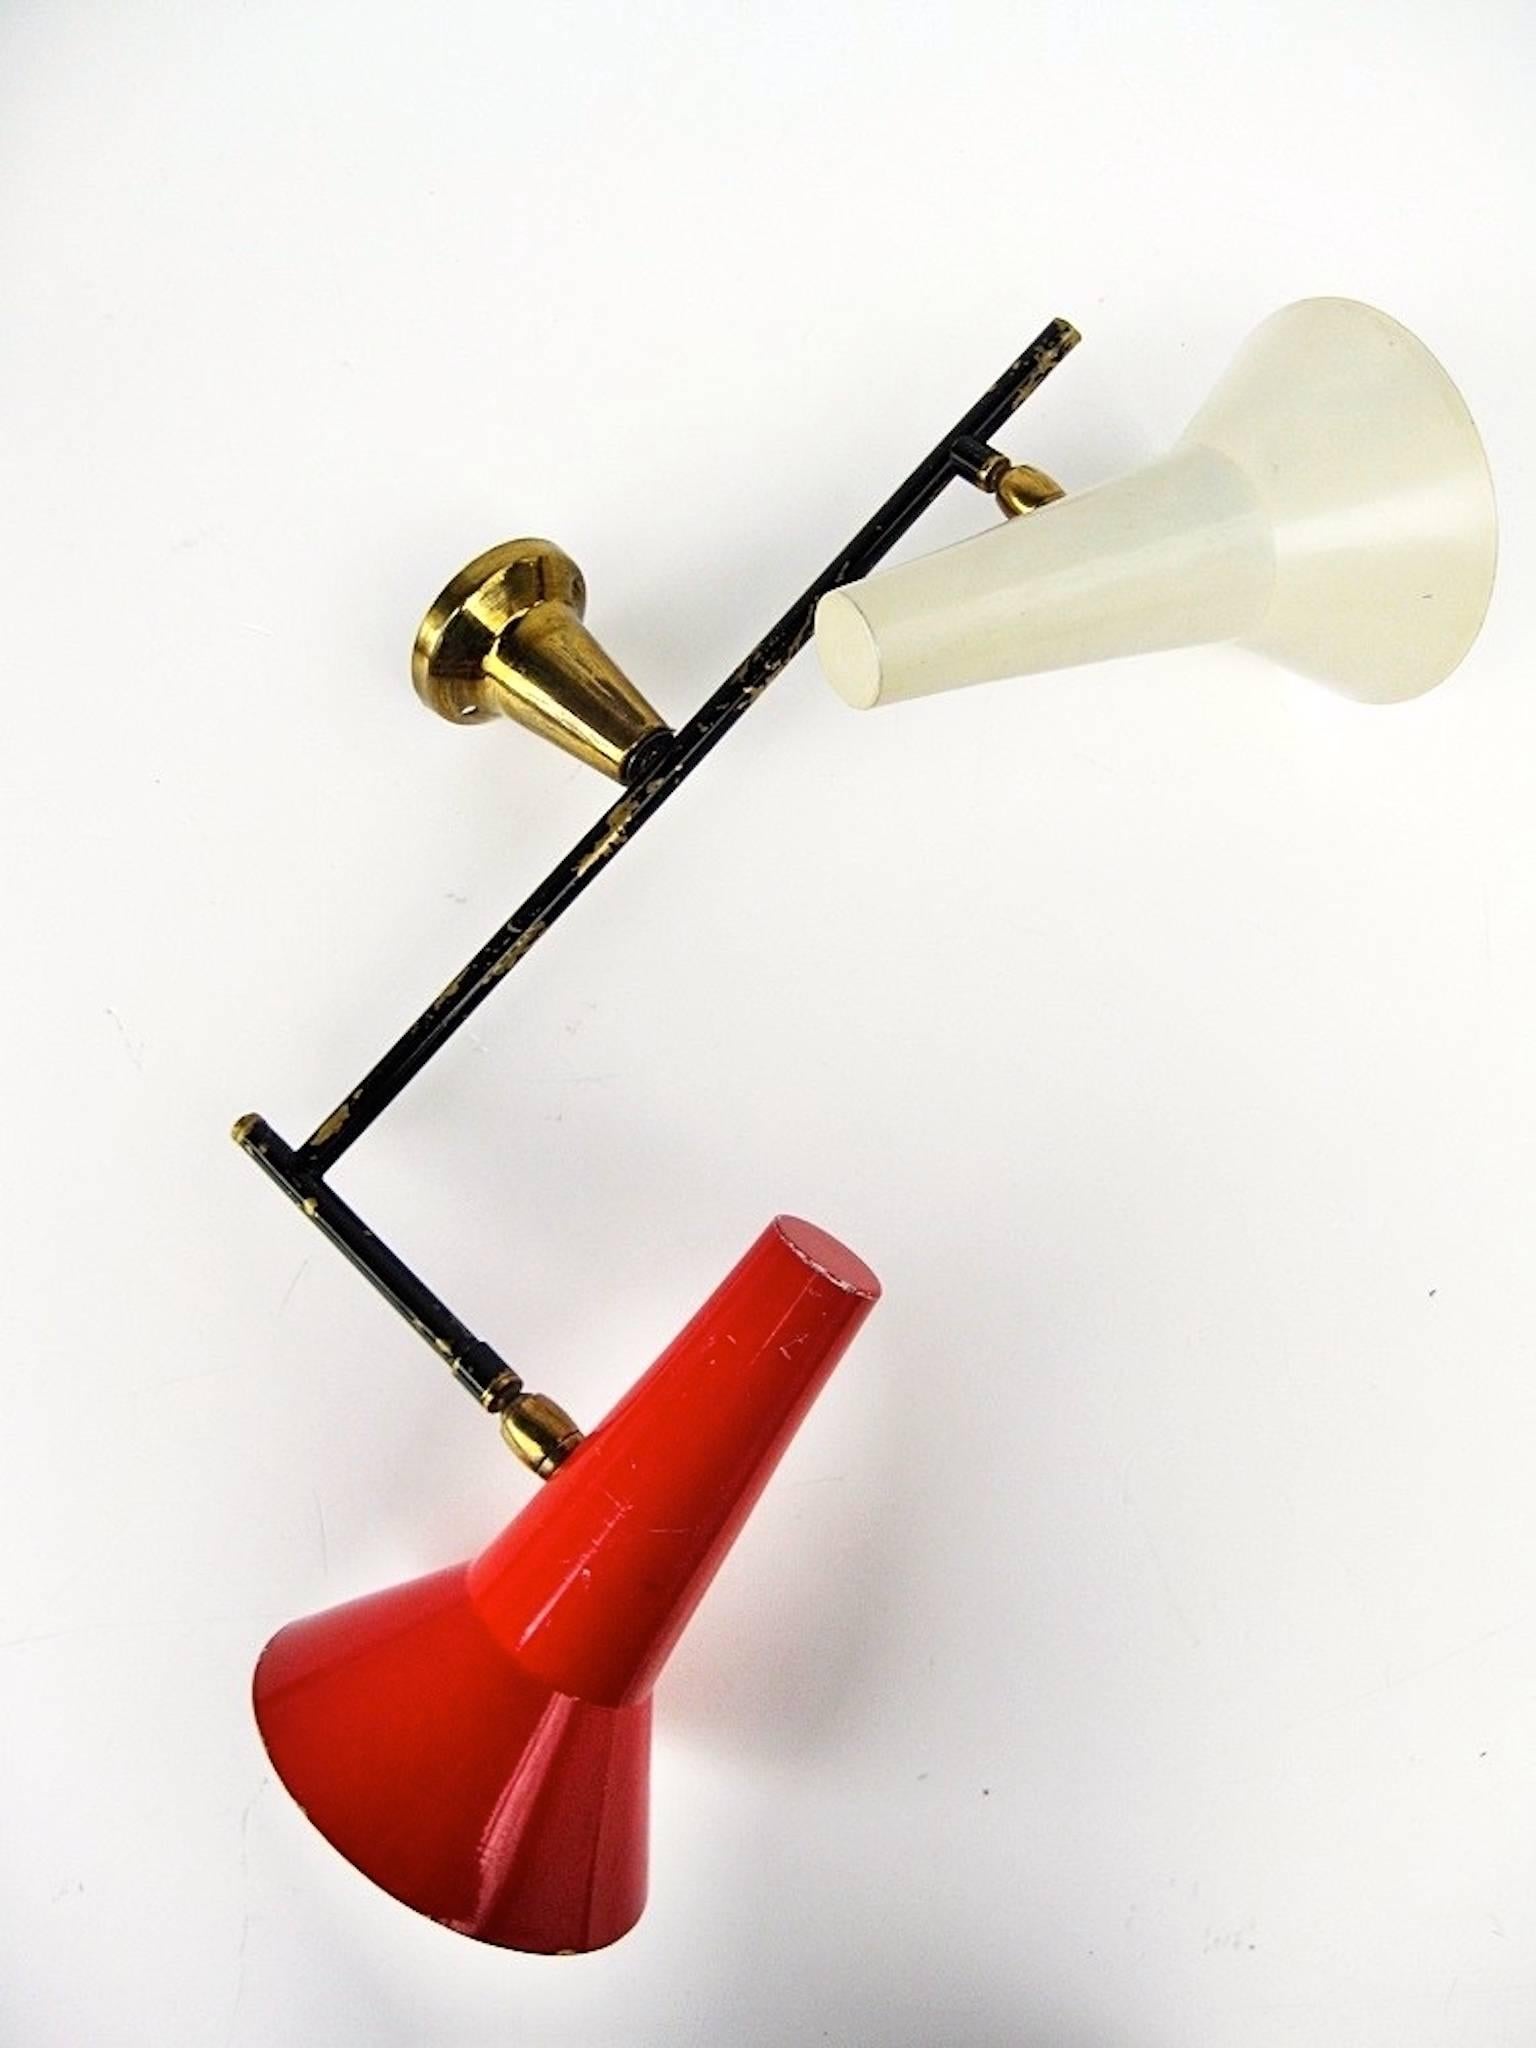 Impressive vintage 1950s Italian homage to Gino Sarfatti's 169/2 wall sconce for Arteluce, 1952.

Brass flanged conical mount, black enameled brass armature with attractively distressed enamel, two spun aluminum lamp heads, one red, one white,